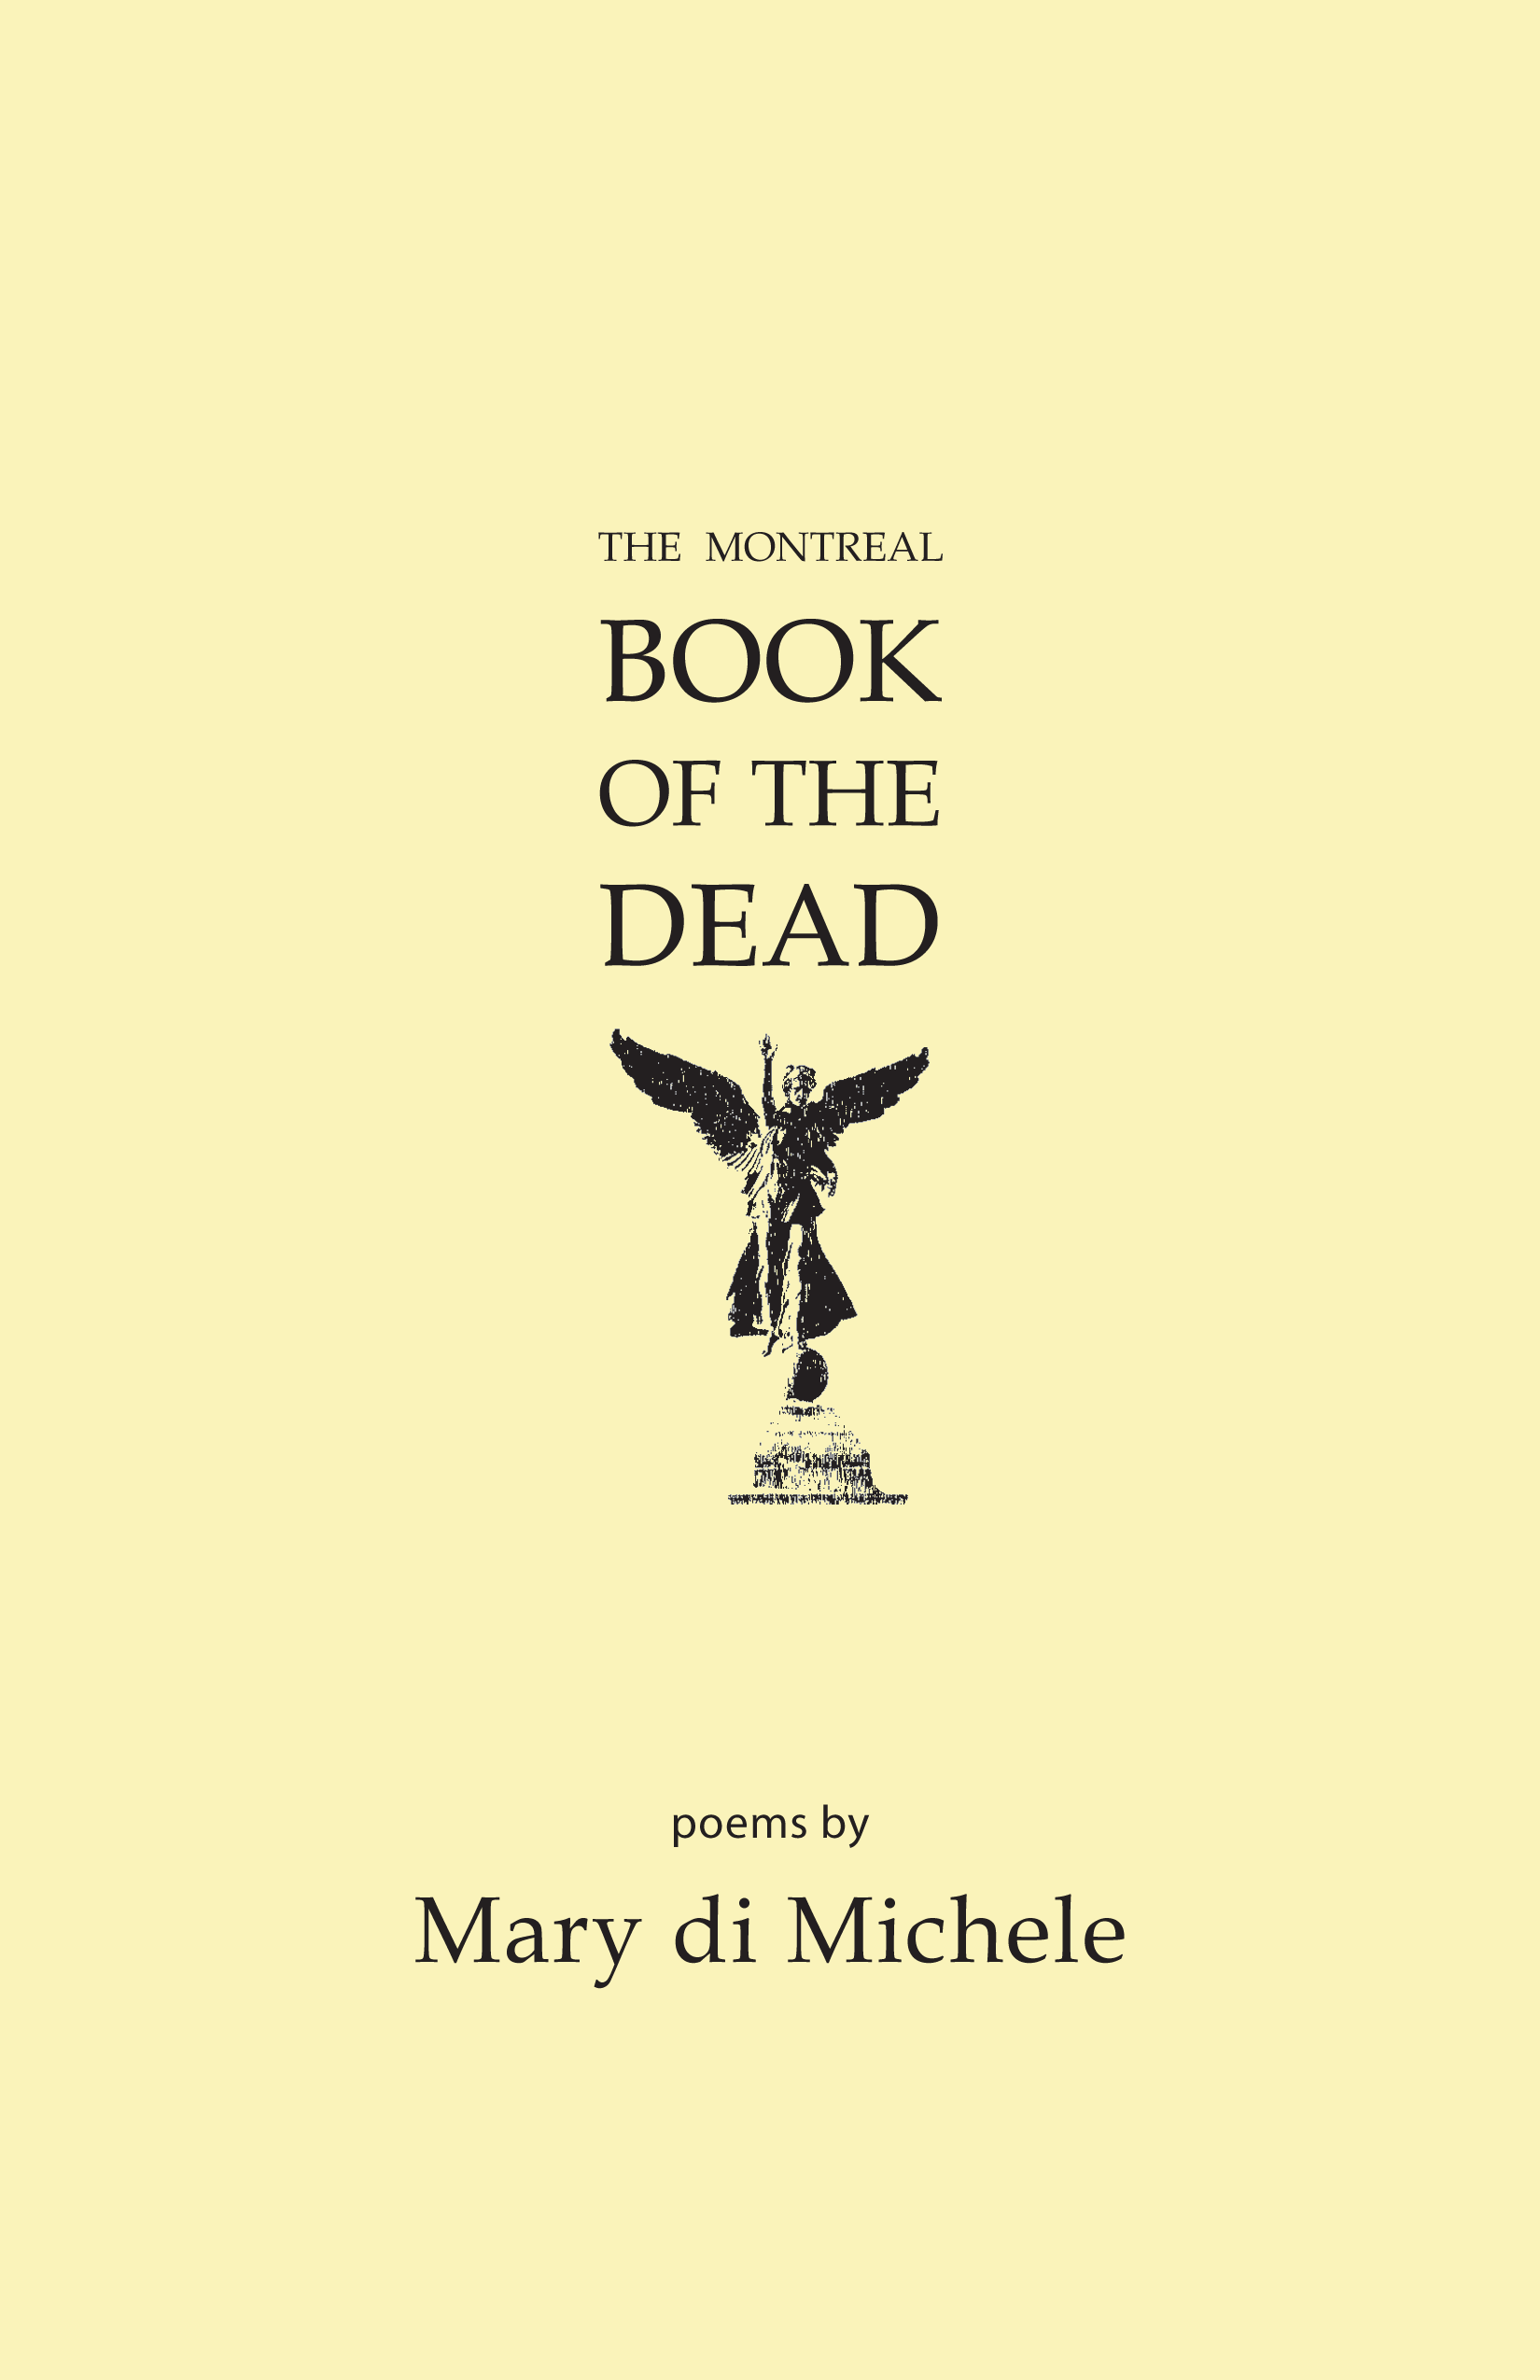 The Montreal Book of the Dead, by Mary di Michele